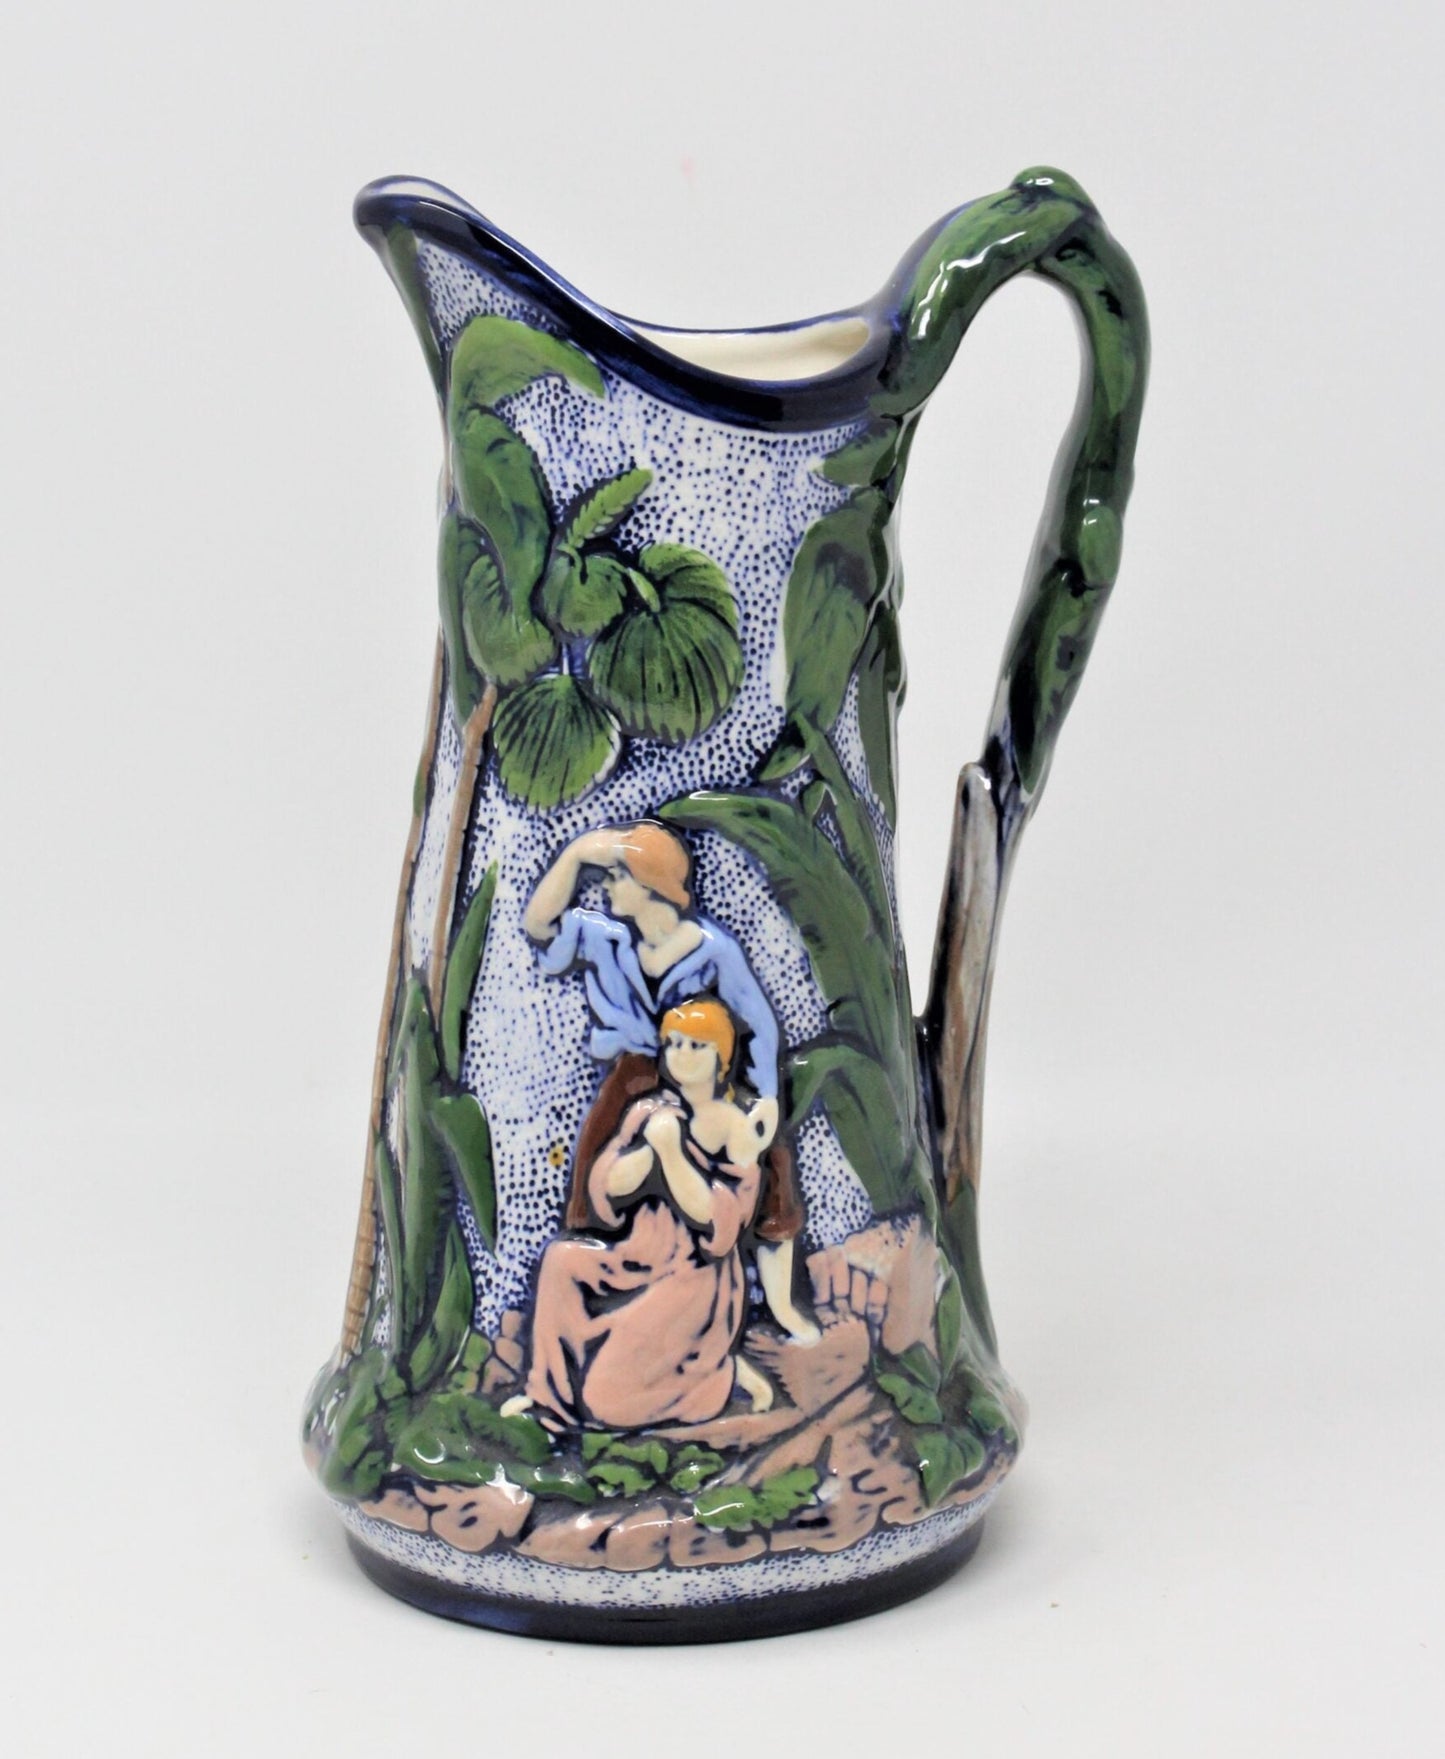 Pitcher, Paul and Virginia, Hand Painted Ceramic, Vintage